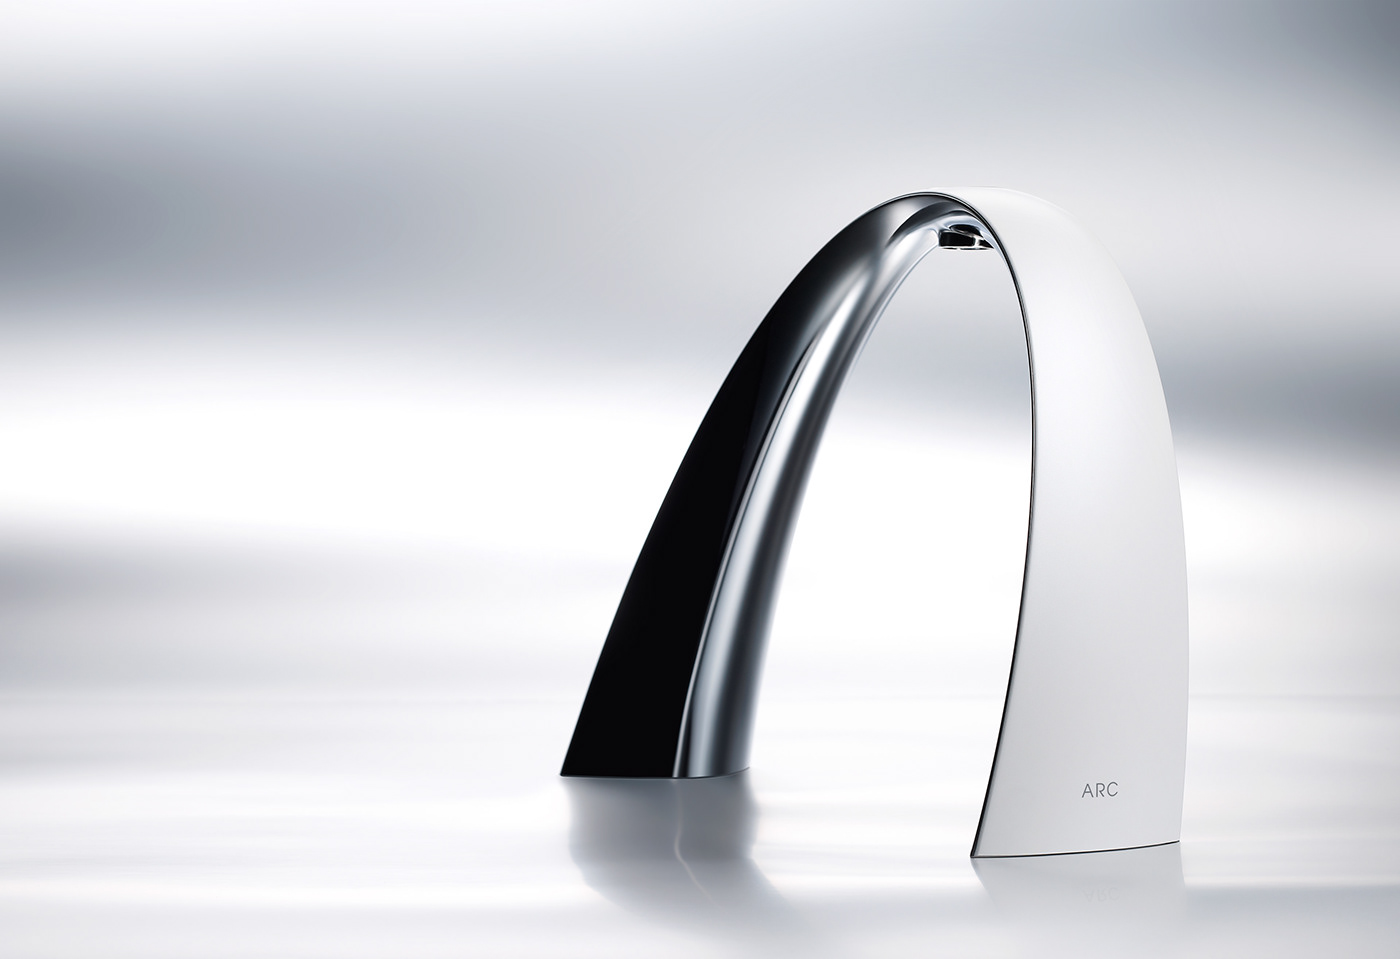 ARC, the electric faucet designed by designer Kim Seungwoo of Industrial design studio VLND.